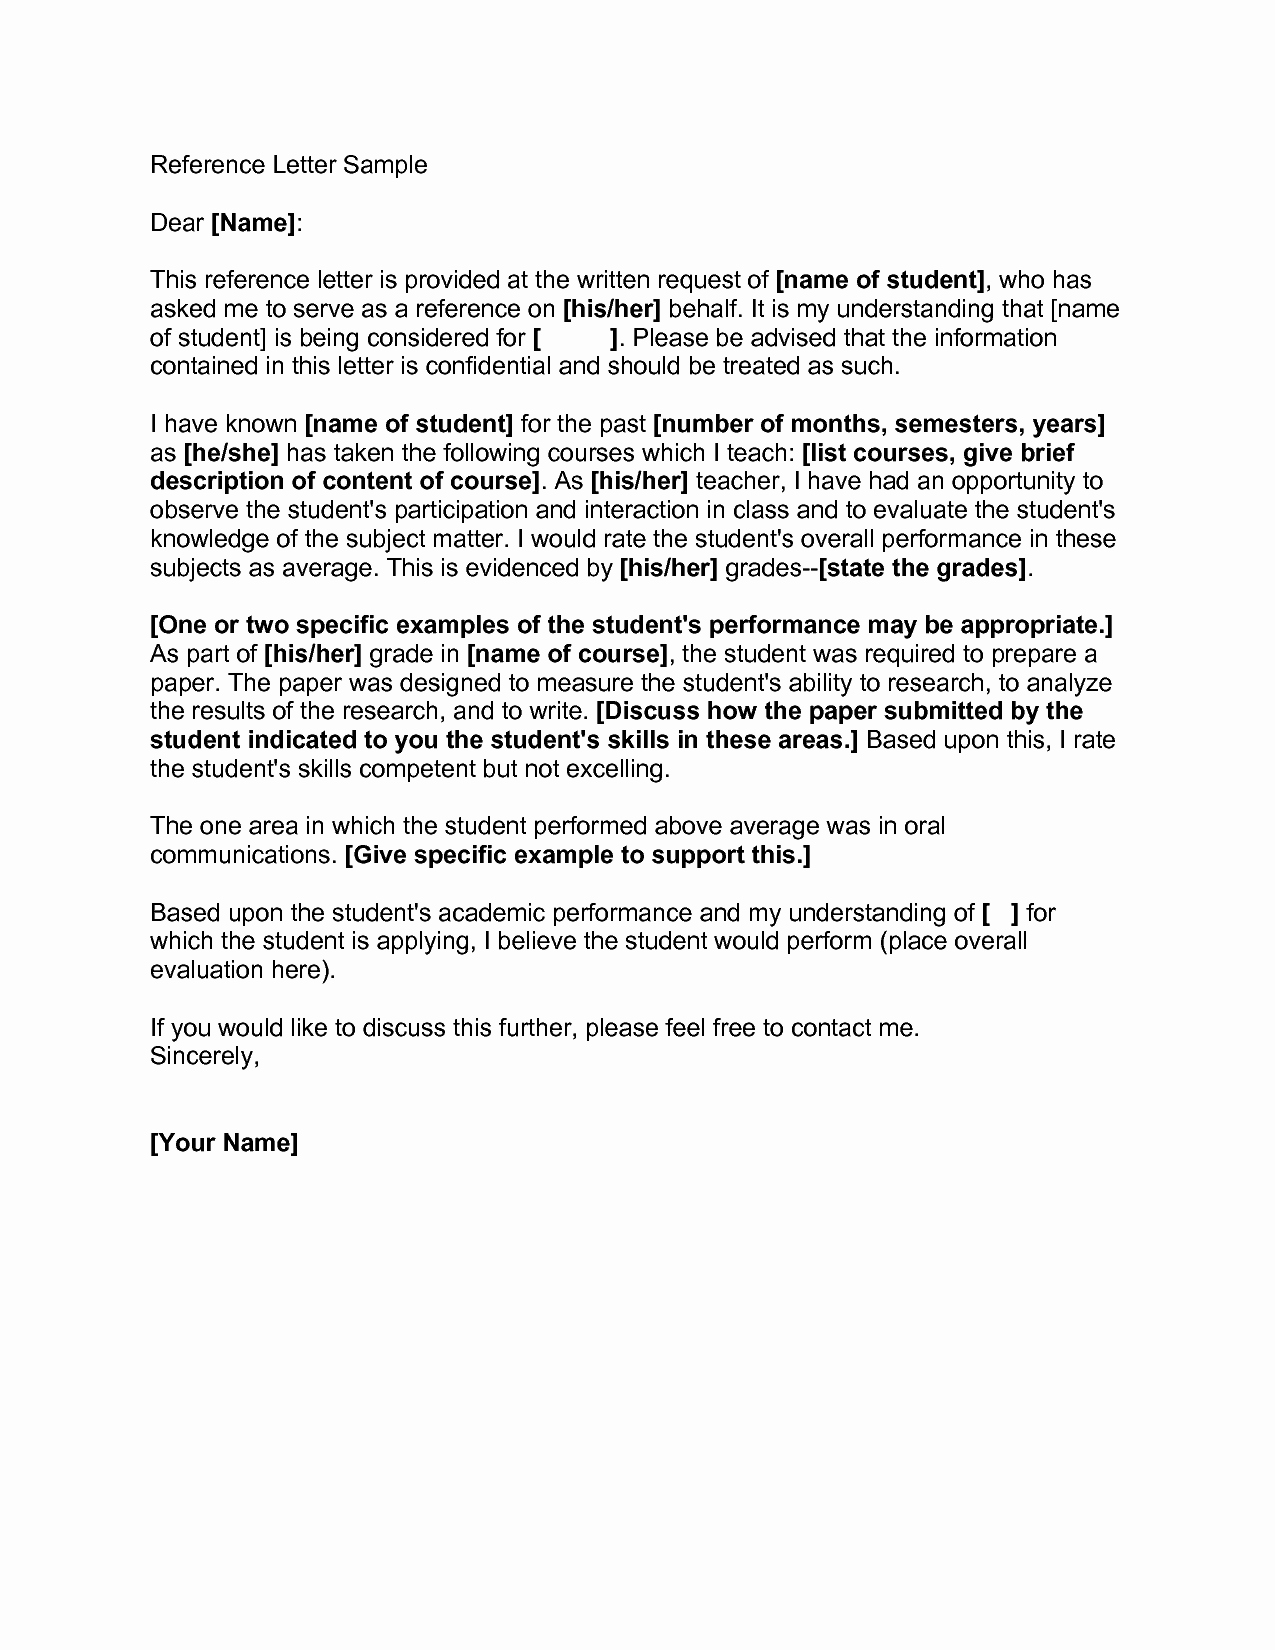 Letter Of Recommendation Request Sample Awesome Reference Letter Samplesexamples Of Reference Letters